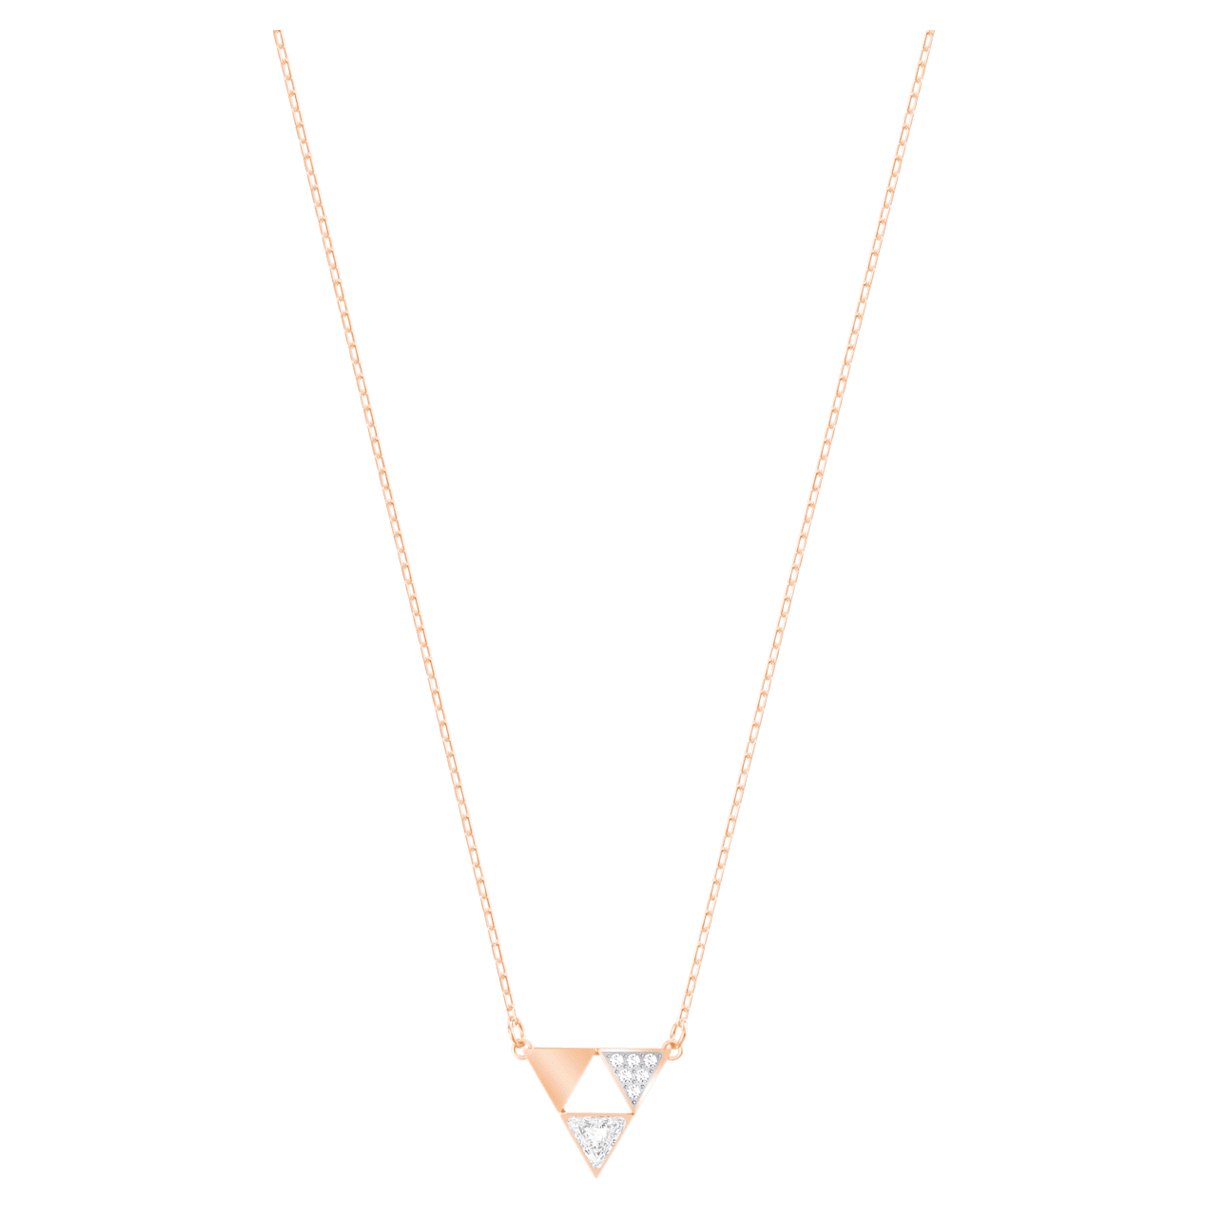 Heroism Necklace, White, Rose-gold tone plated